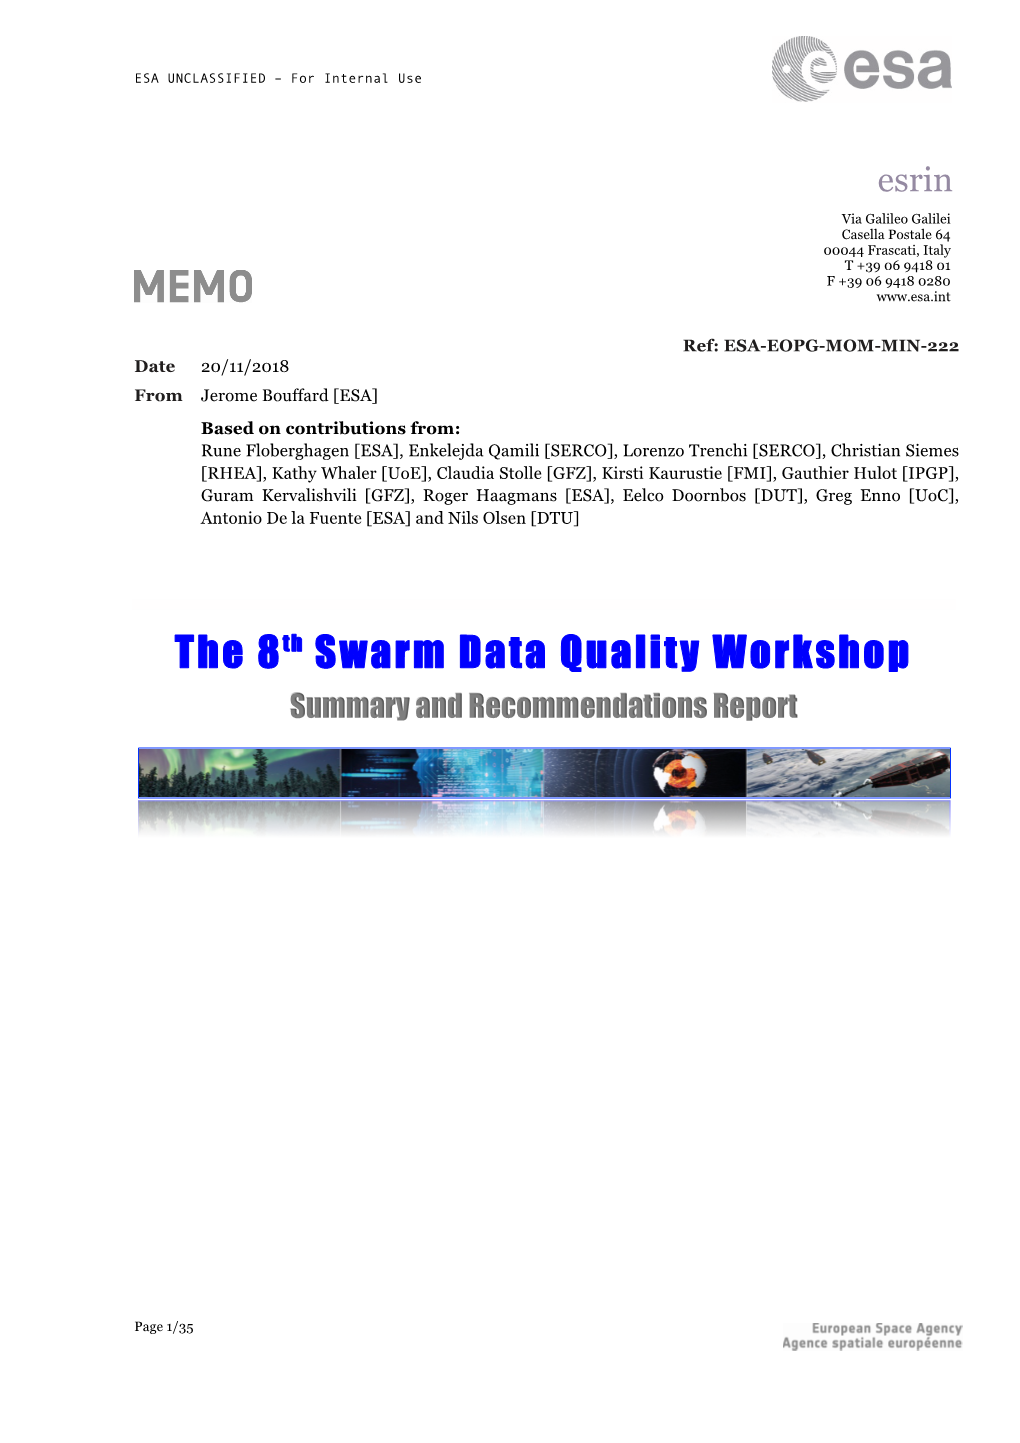 The 8Th Swarm Data Quality Workshop (DQW#8) Held in ESA ESRIN from Monday 08Th October (Afternoon) to Friday 12Th October 2018 (Morning)